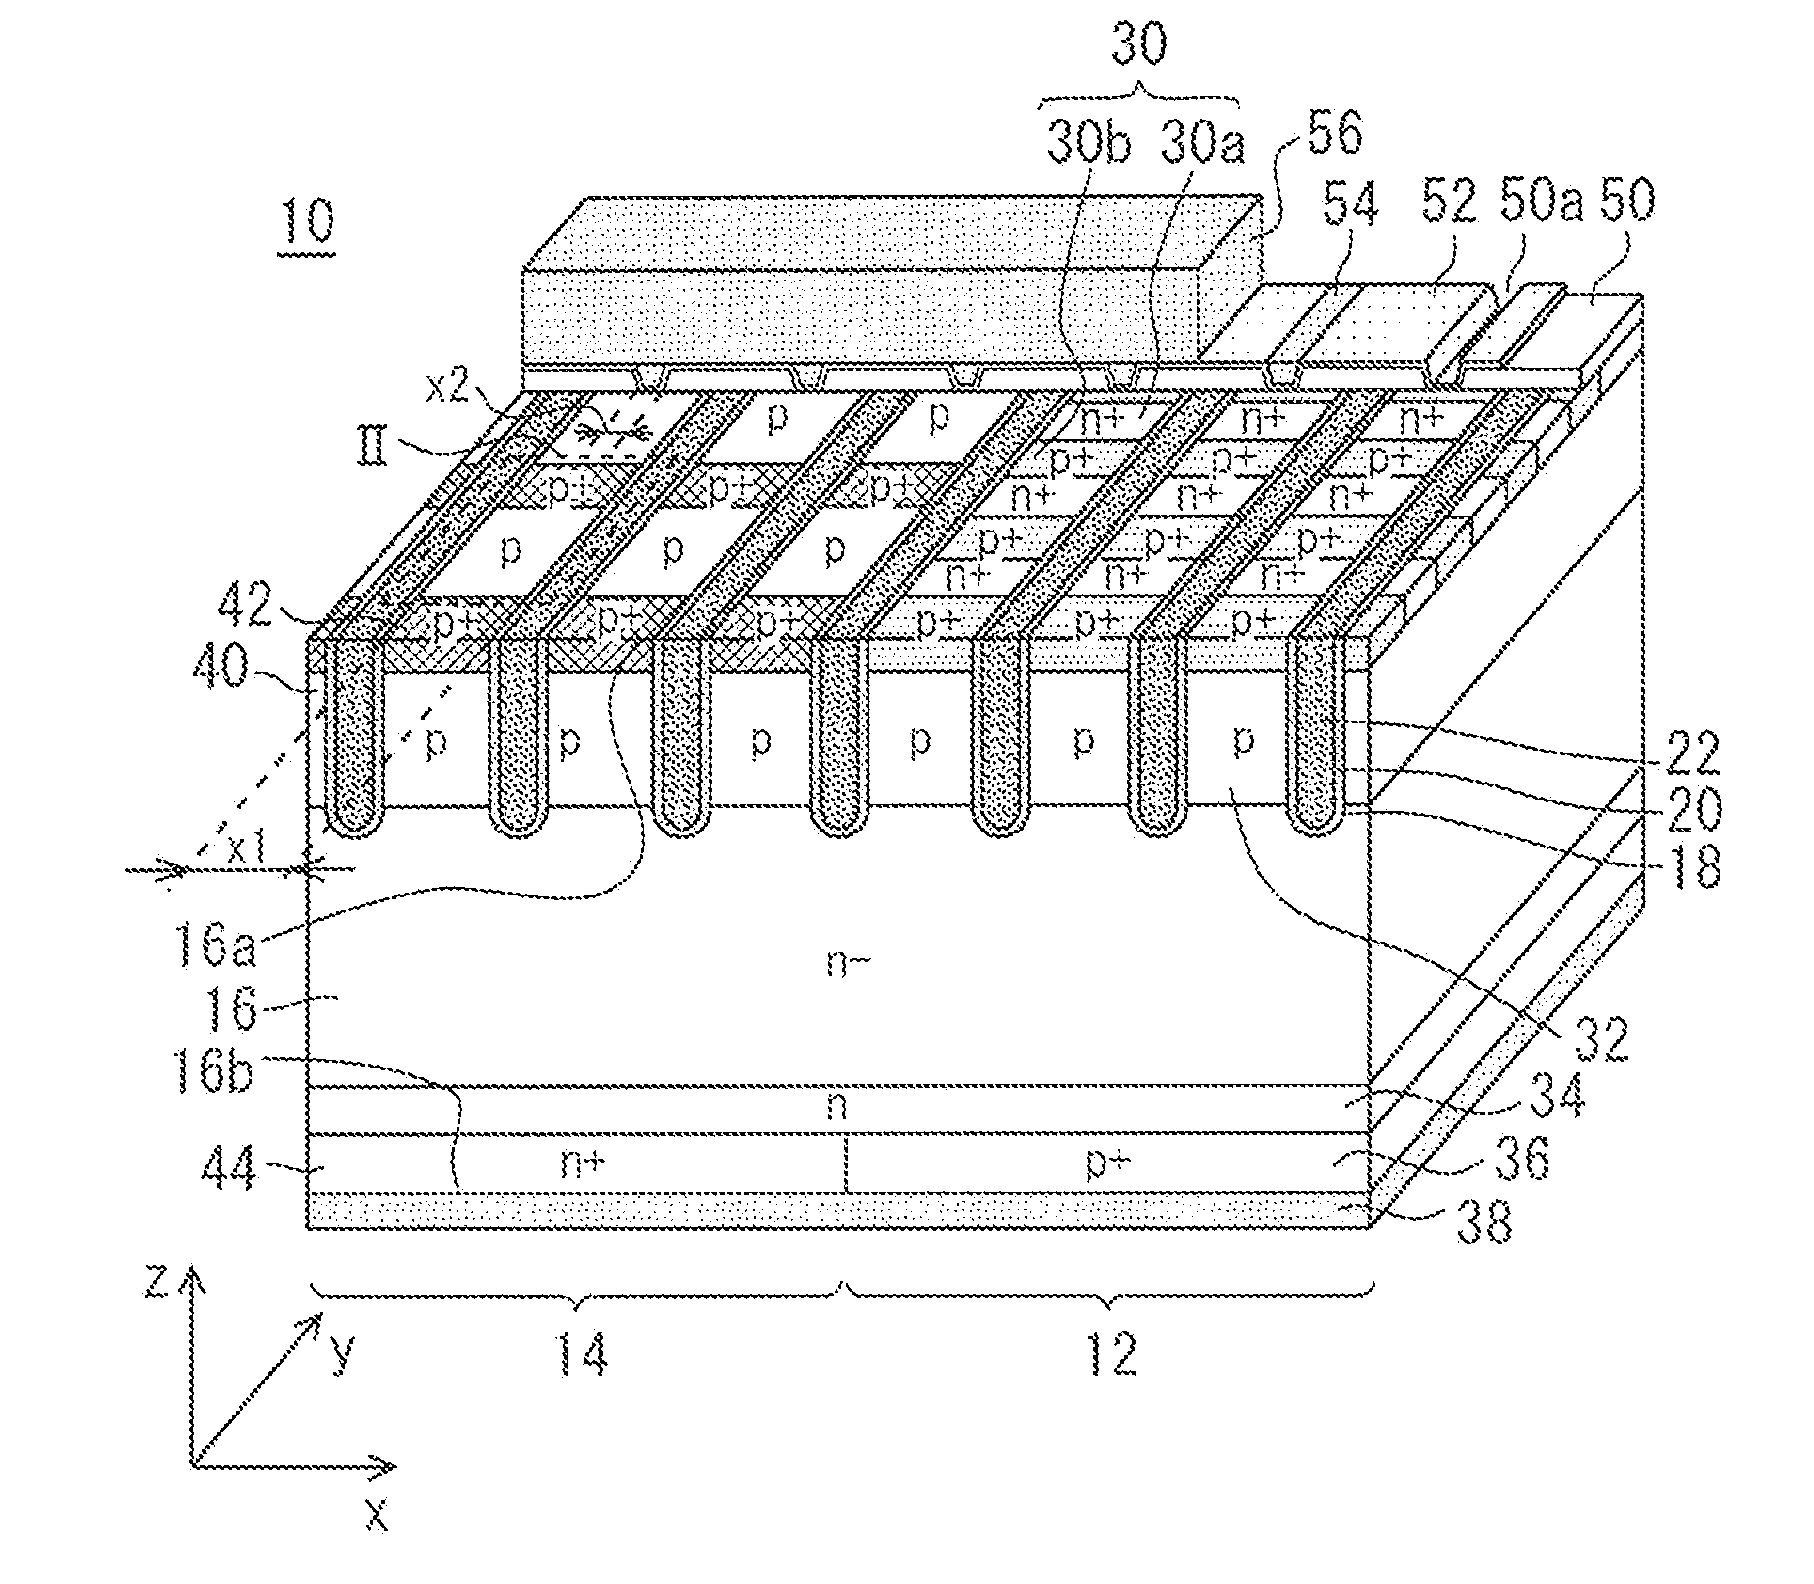 Reverse conducting semiconductor device